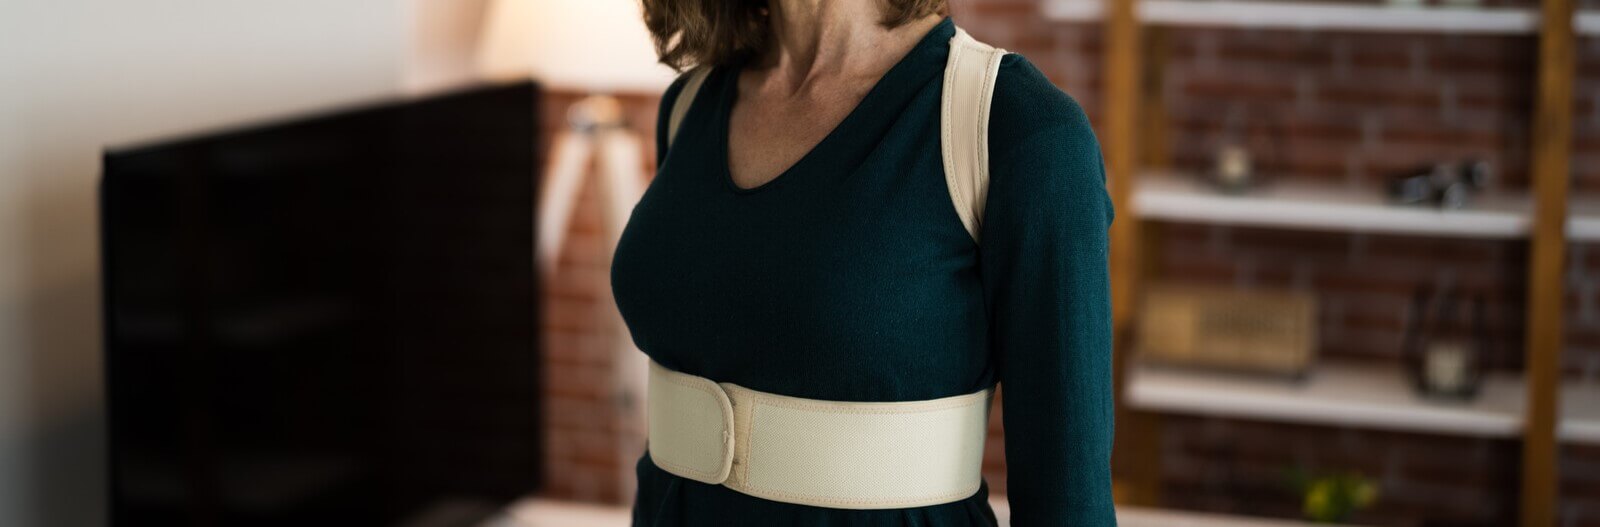 Woman wearing a posture corrector in her house